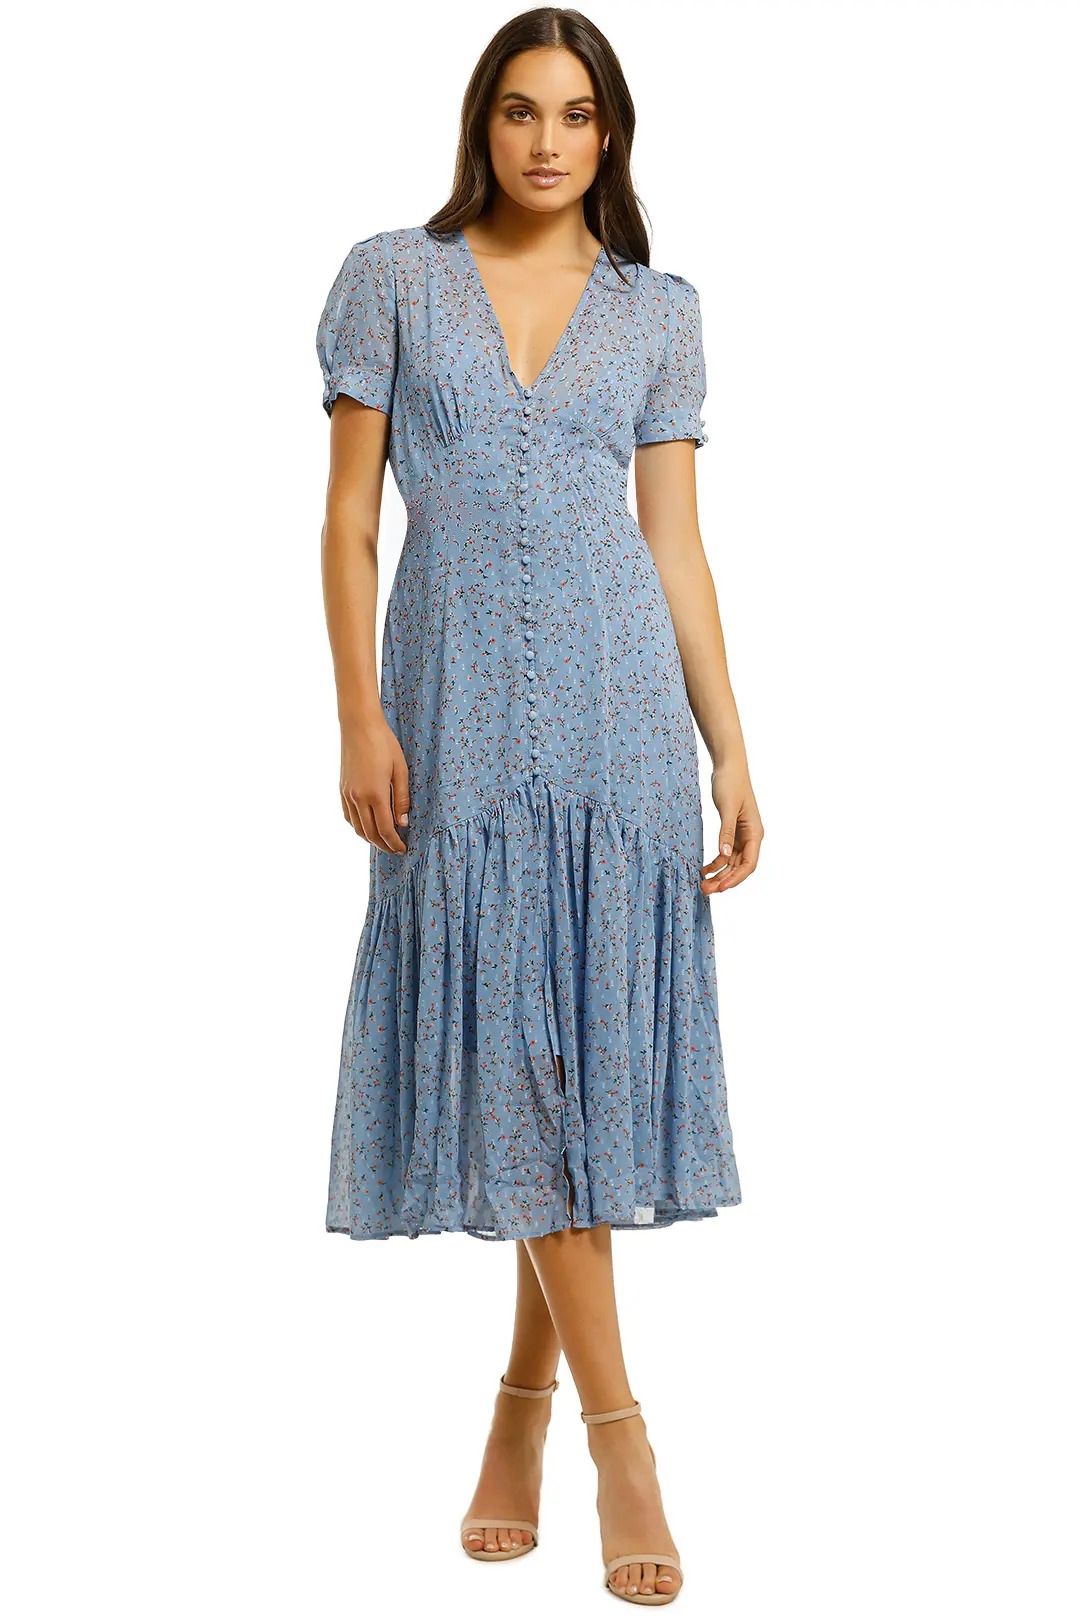 We-Are-Kindred-Marseille-Midi-Dress-Cornflower-Ditsy-Front-No-Belt